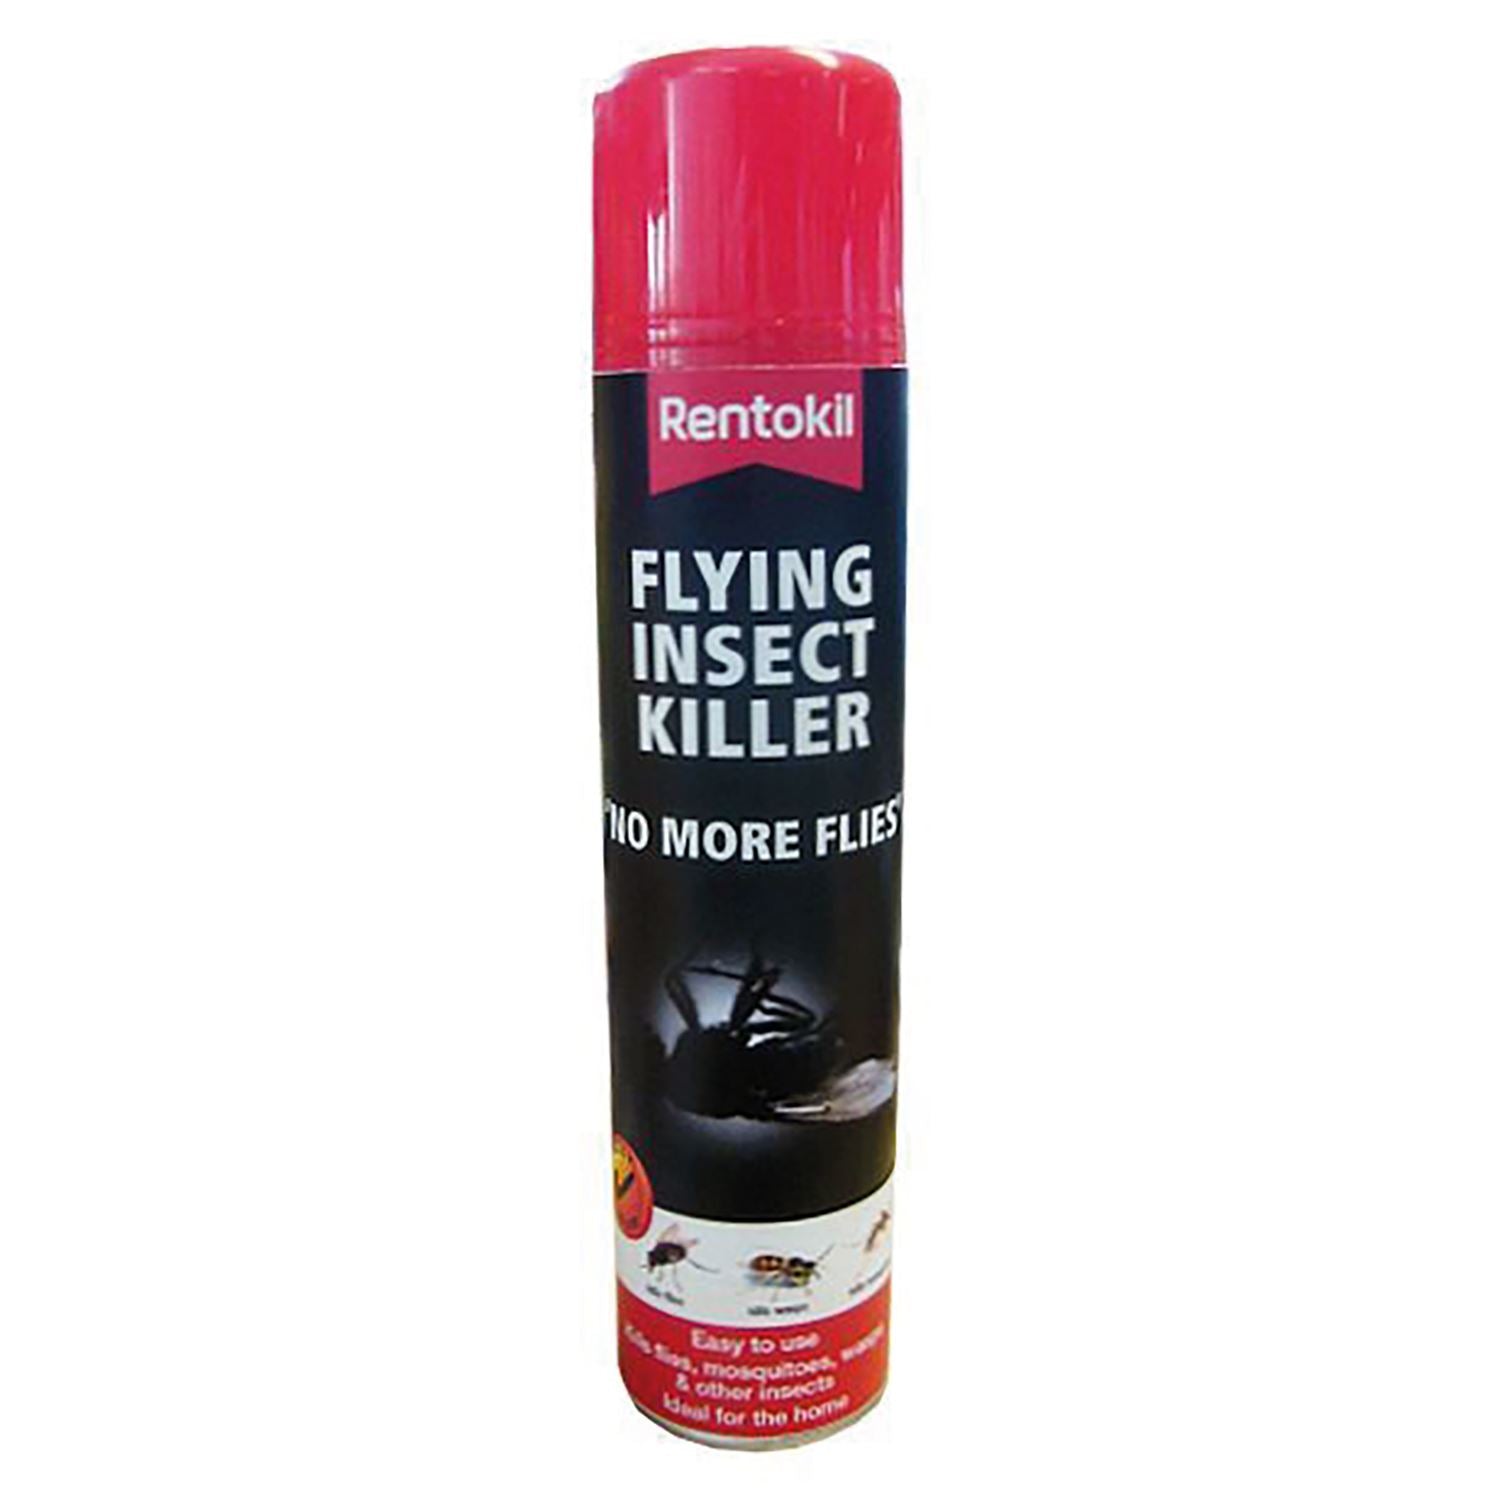 Rentokil Flying Insect Killer - Just Horse Riders